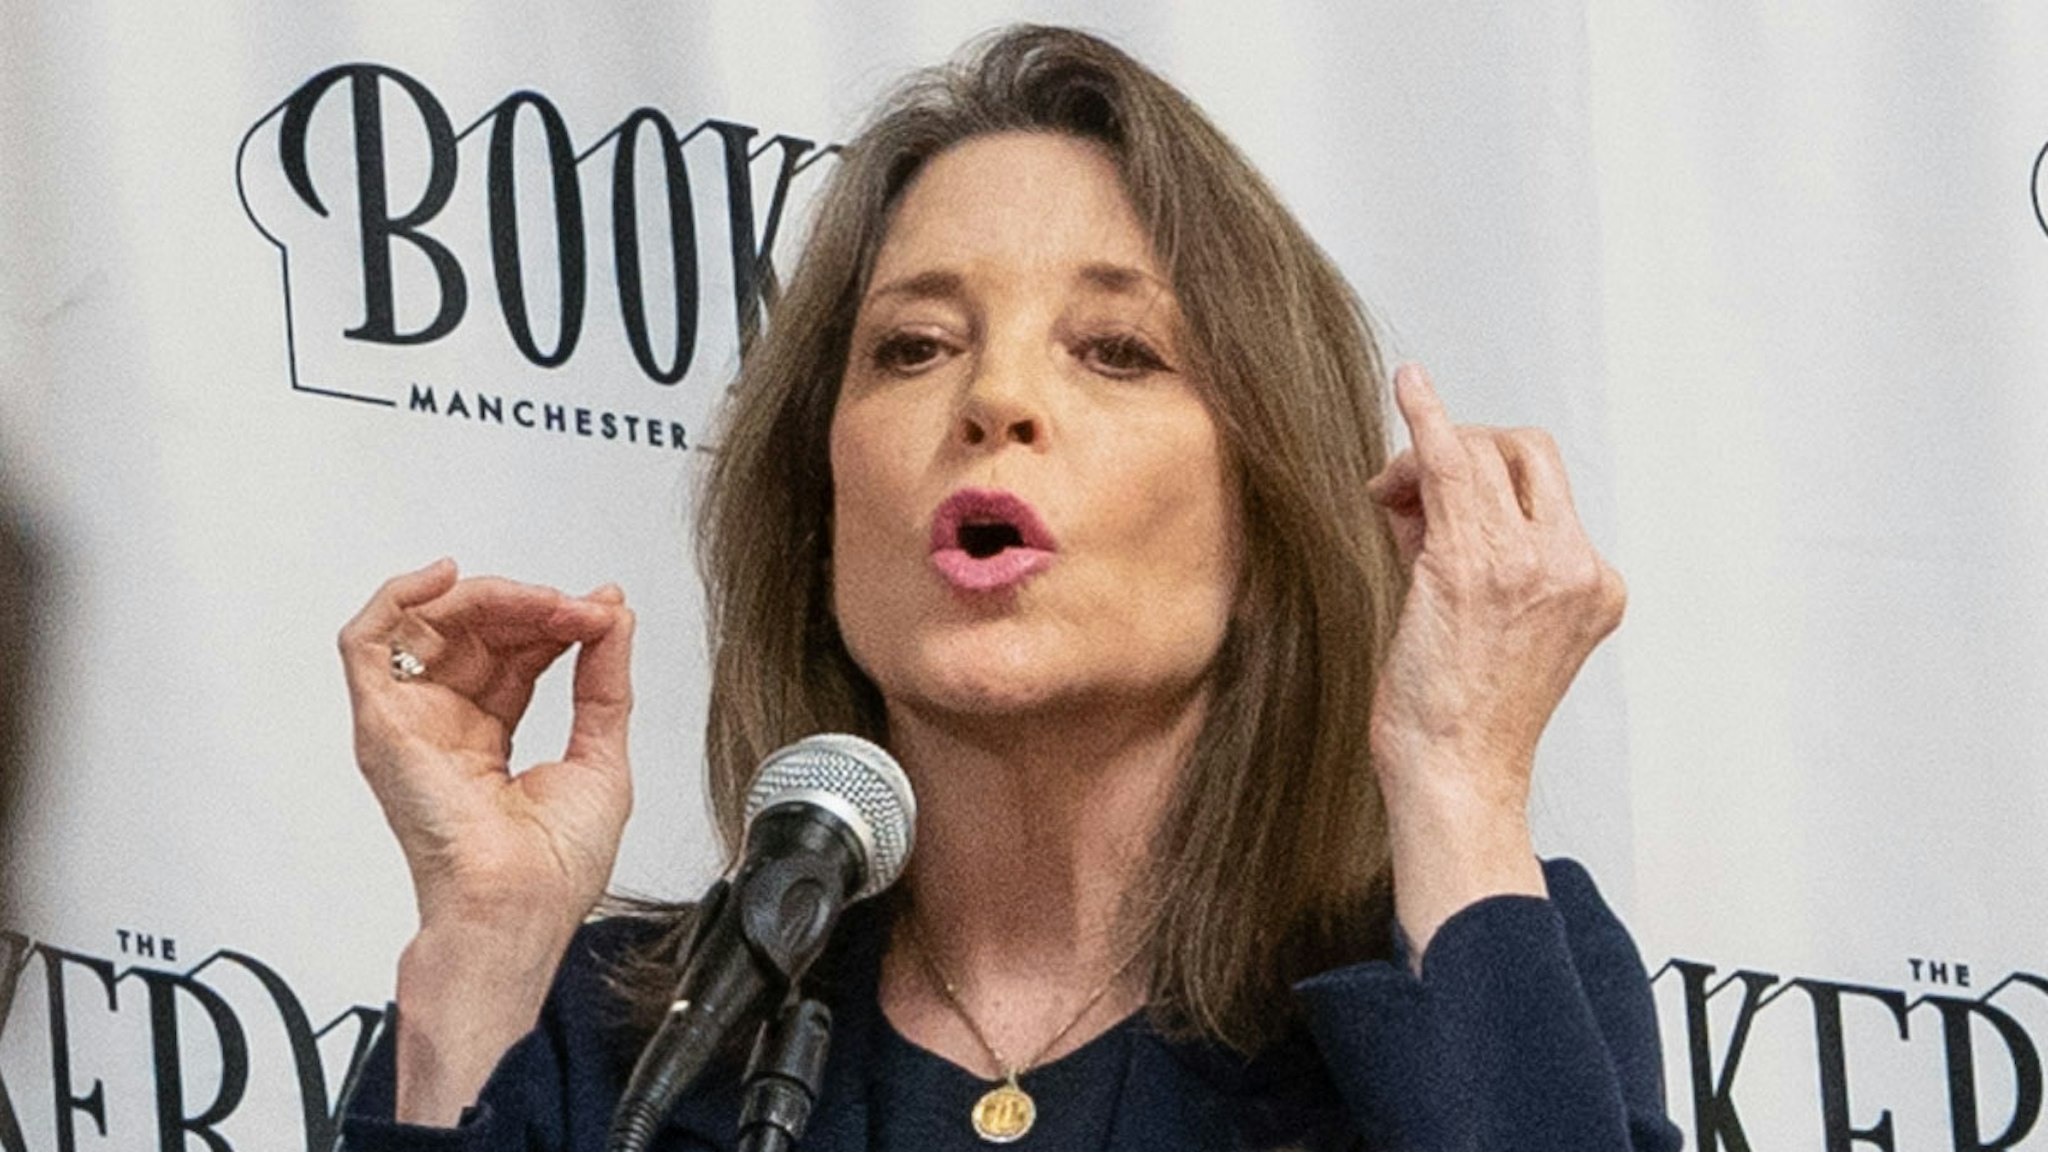 MANCHESTER, NEW HAMPSHIRE, UNITED STATES - 2023/03/11: Marianne Williamson discusses her campaign platform with members of the public at Bookery Manchester in Manchester. A week after announcing her bid for the presidency, 2024 hopeful Democrat Marianne Williamson began campaigning in New Hampshire. On March 11, Williamson made three stops - in Concord, Laconia, and Manchester. Democrats in the state have criticized the party's recent decision to hold it's first primary in South Carolina, a move designed to reflect more diversity. For the past 50 years, the first Democratic primary has been held in New Hampshire.